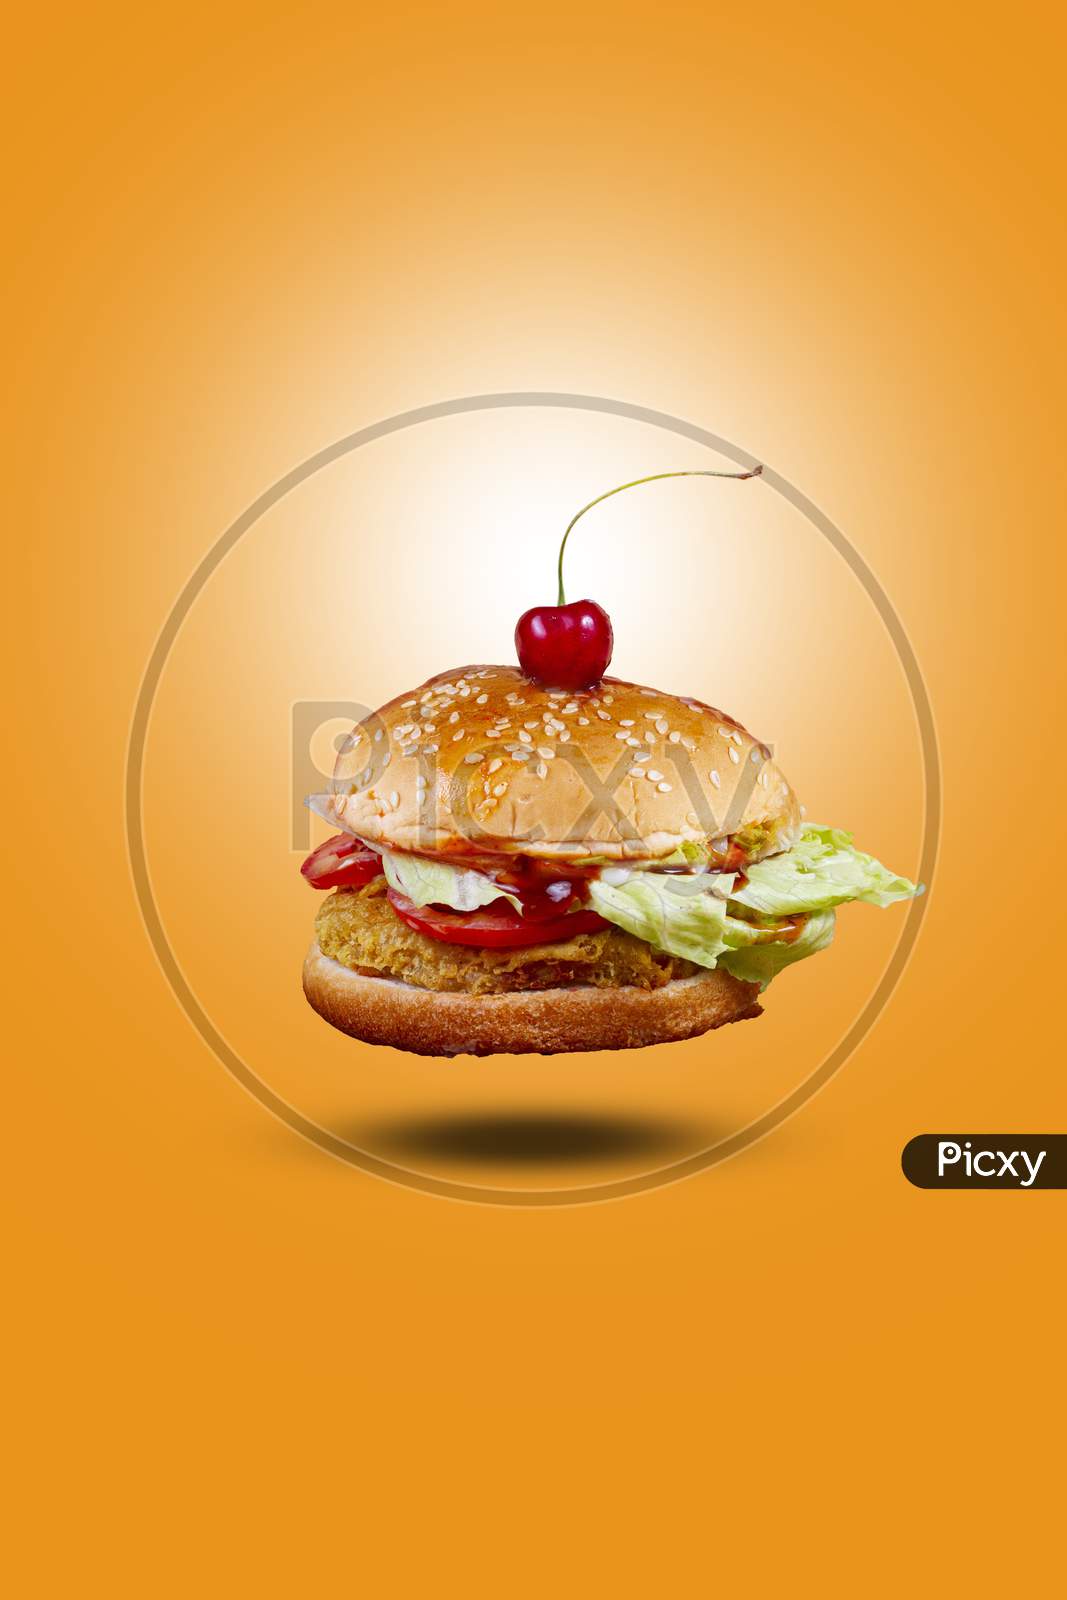 Juicy Mexican Flying Burger, Hamburger Or Cheeseburger With One Chicken Patties, With Sauce. Concept Of Mexican Fast Food. Copy Space